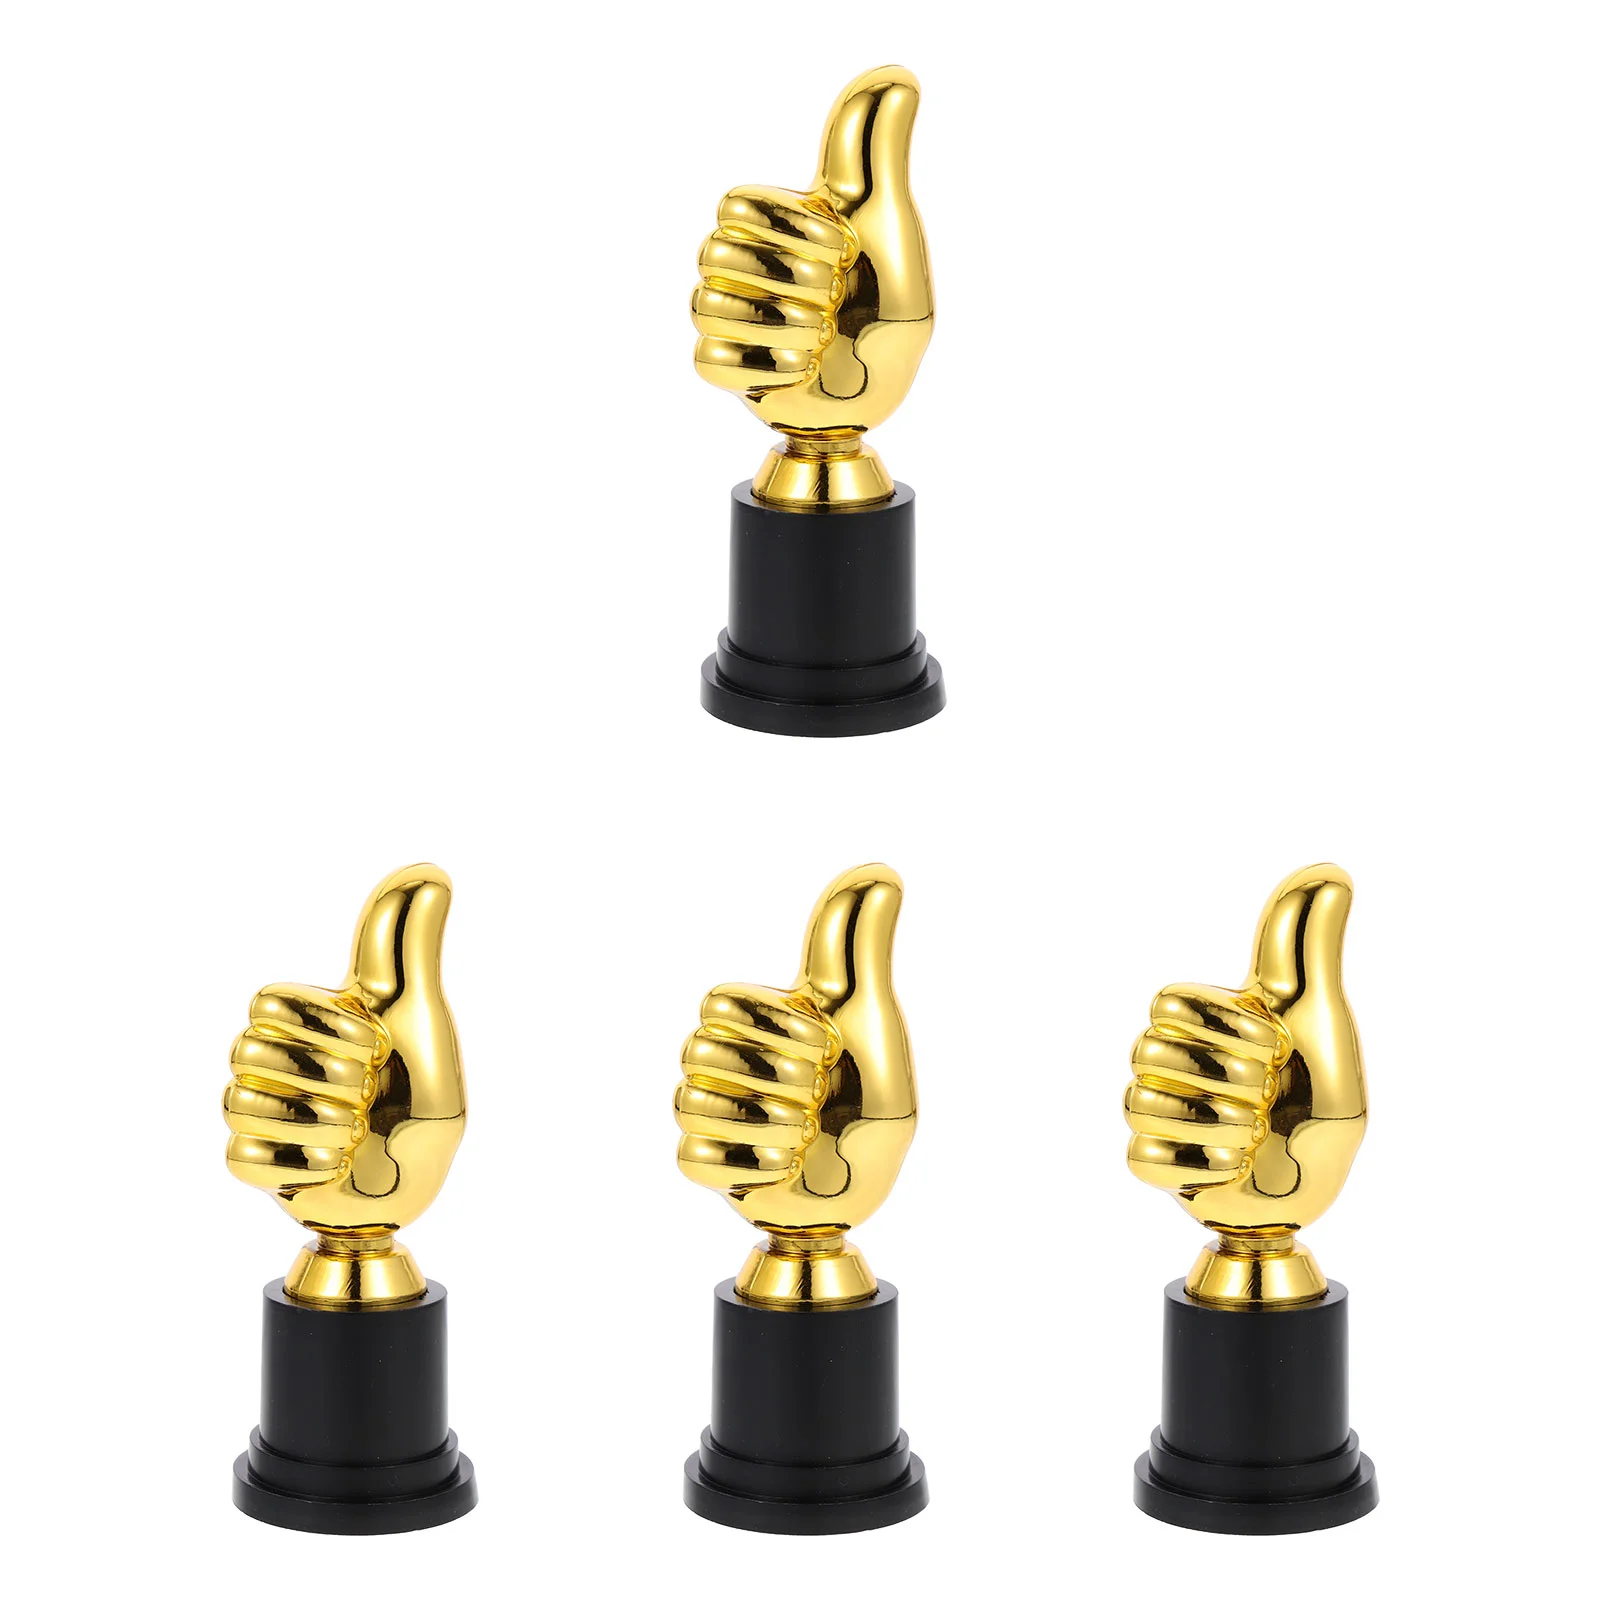 

4 Pcs Kids Awesome Trophy Decor Competition Encouragement Childrens Toys Awards Plastic Halloween